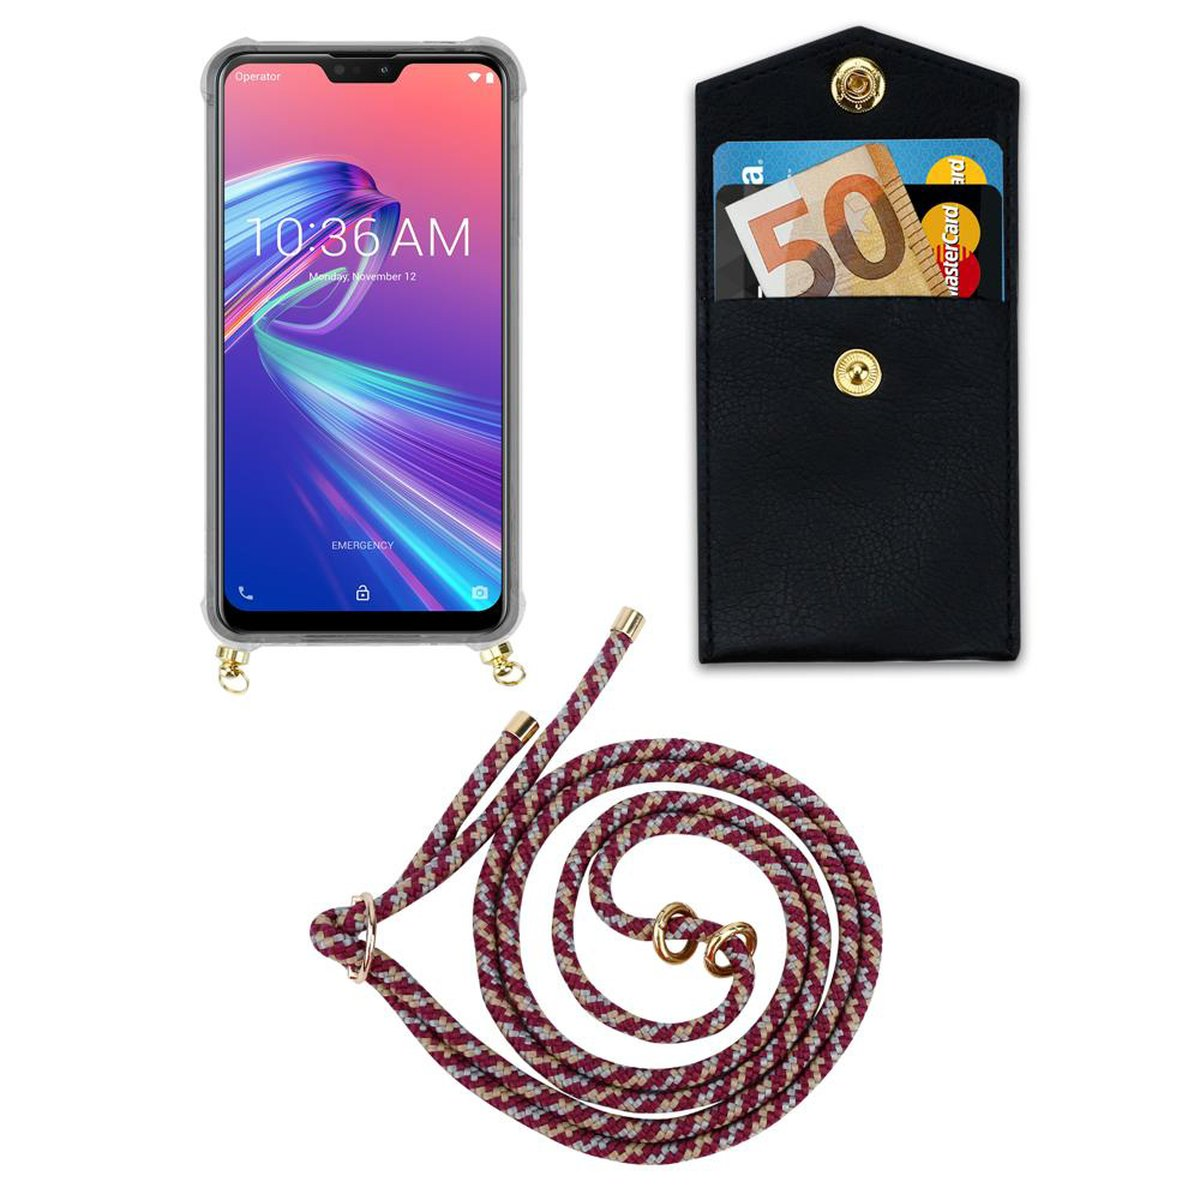 Hülle, abnehmbarer ZenFone PRO Gold mit Ringen, Band CADORABO Handy ROT WEIß Kette und GELB (6.3 M2 Kordel Backcover, Zoll), MAX Asus,